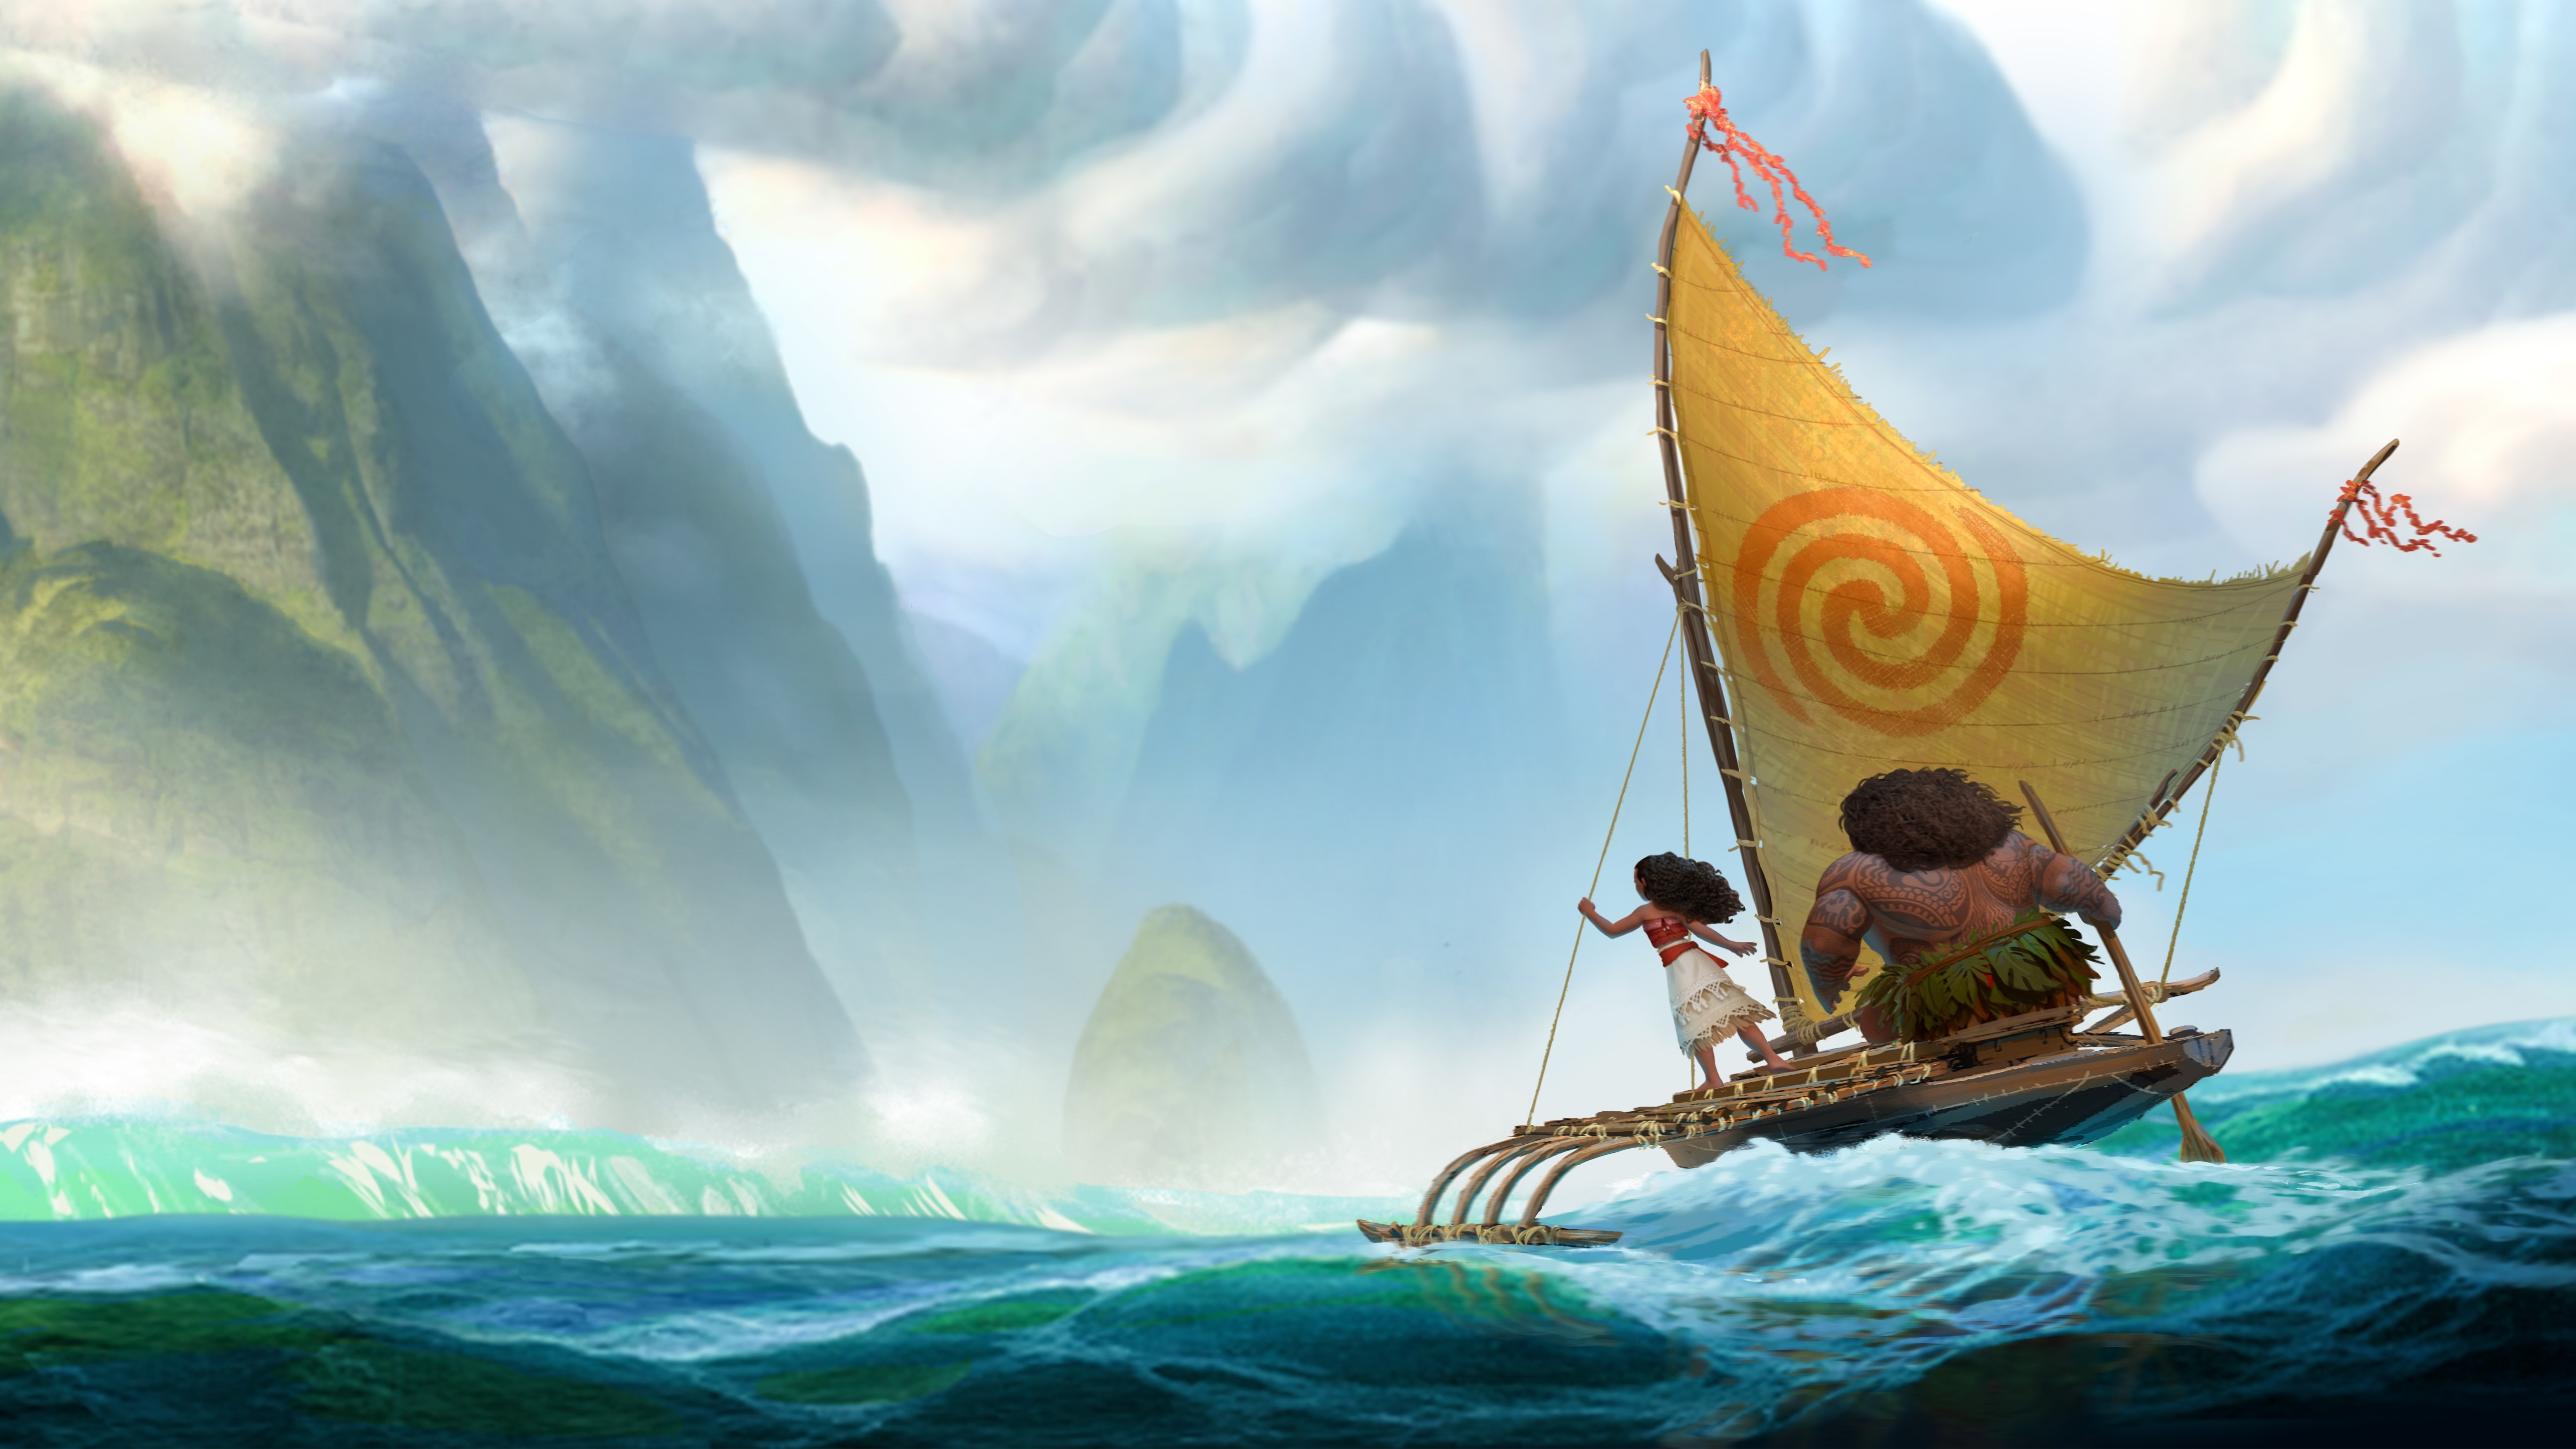 Moana Movie Artwork HD, HD Movies, 4k Wallpapers, Images ...